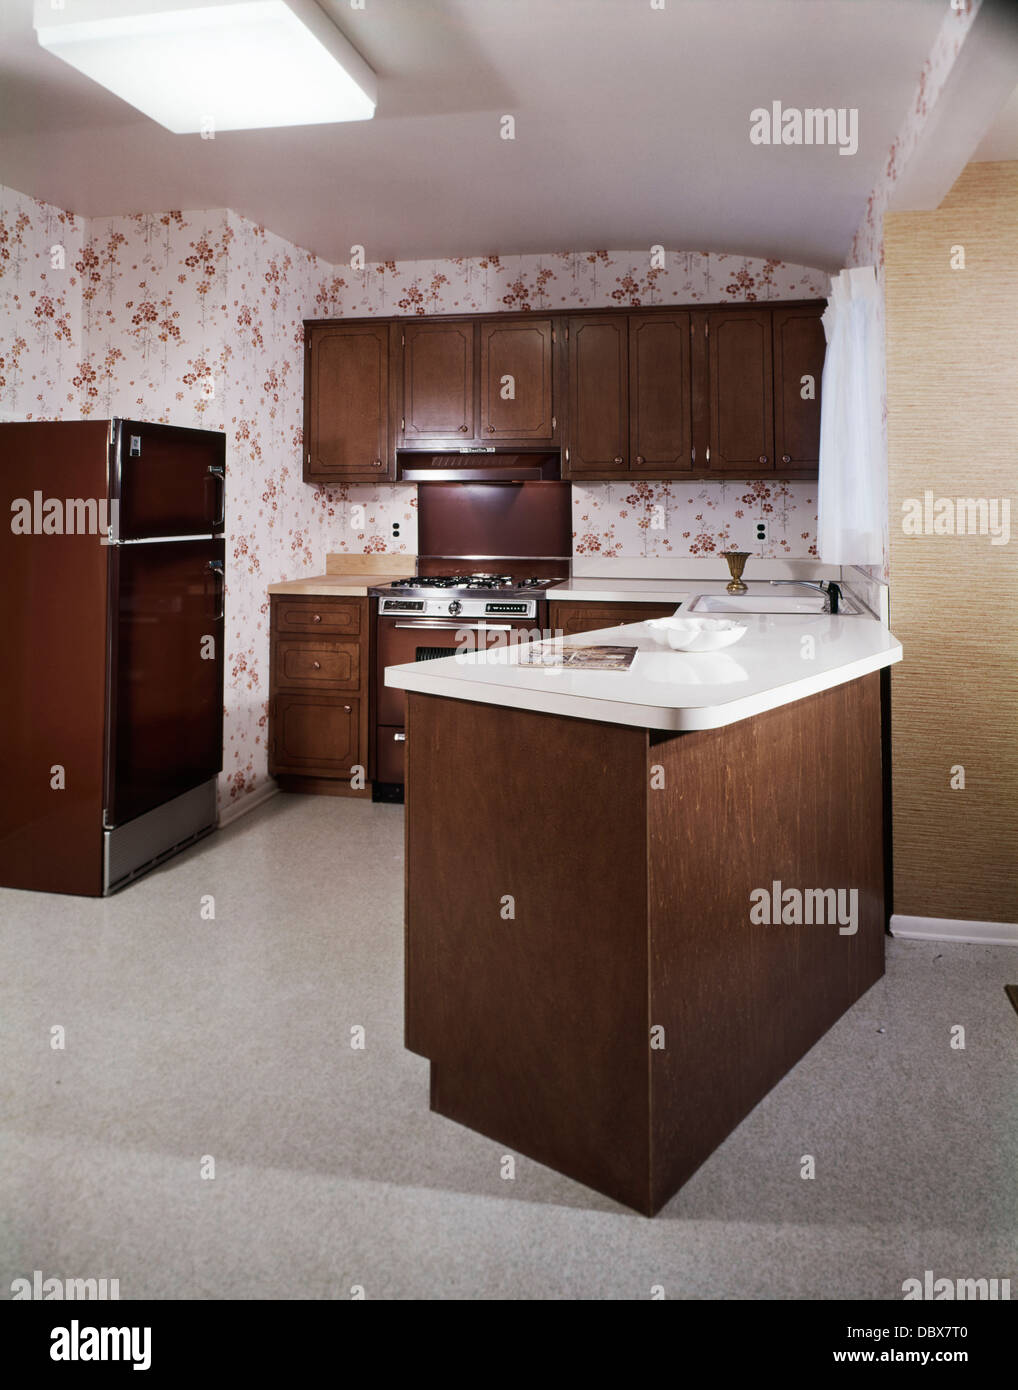 1970 1970s RETRO KITCHEN WITH DINING COUNTER ISLAND DARK WOODEN CABINETS AND APPLIANCES RUST AND WHITE WALLPAPER Stock Photo